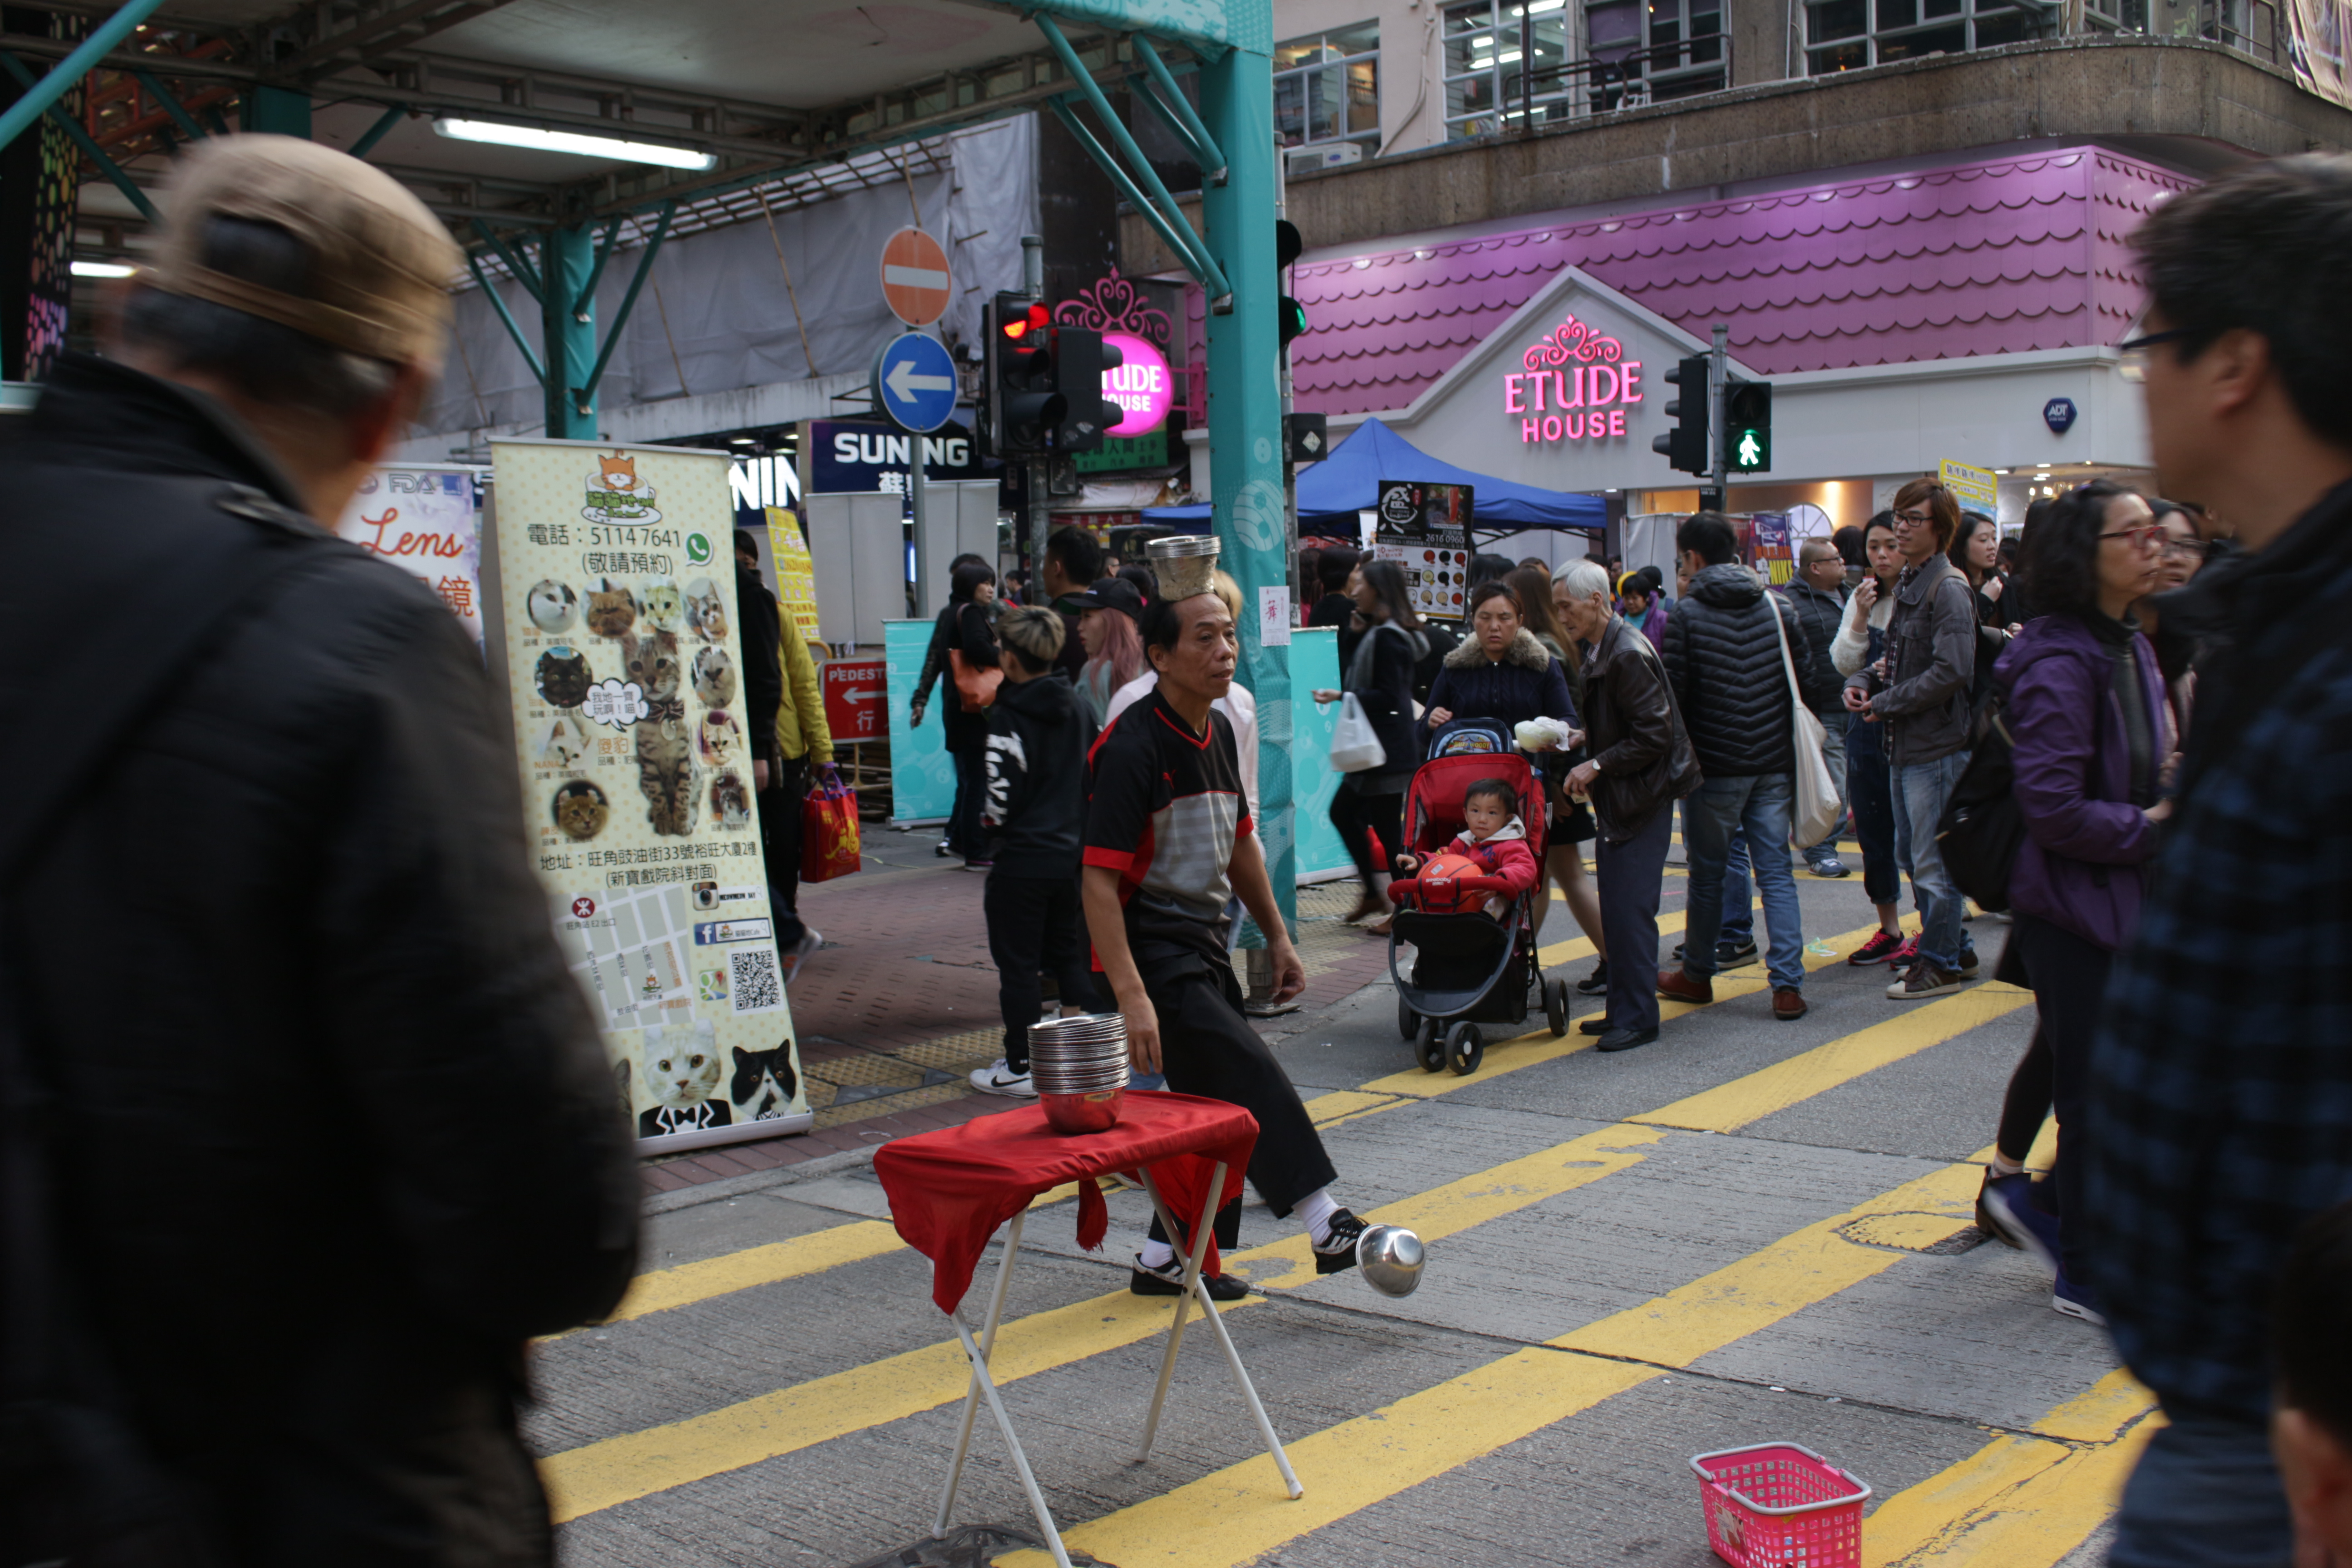 Street performer on Sai Yeung Choi Street South. Photo by Vicky Wong.